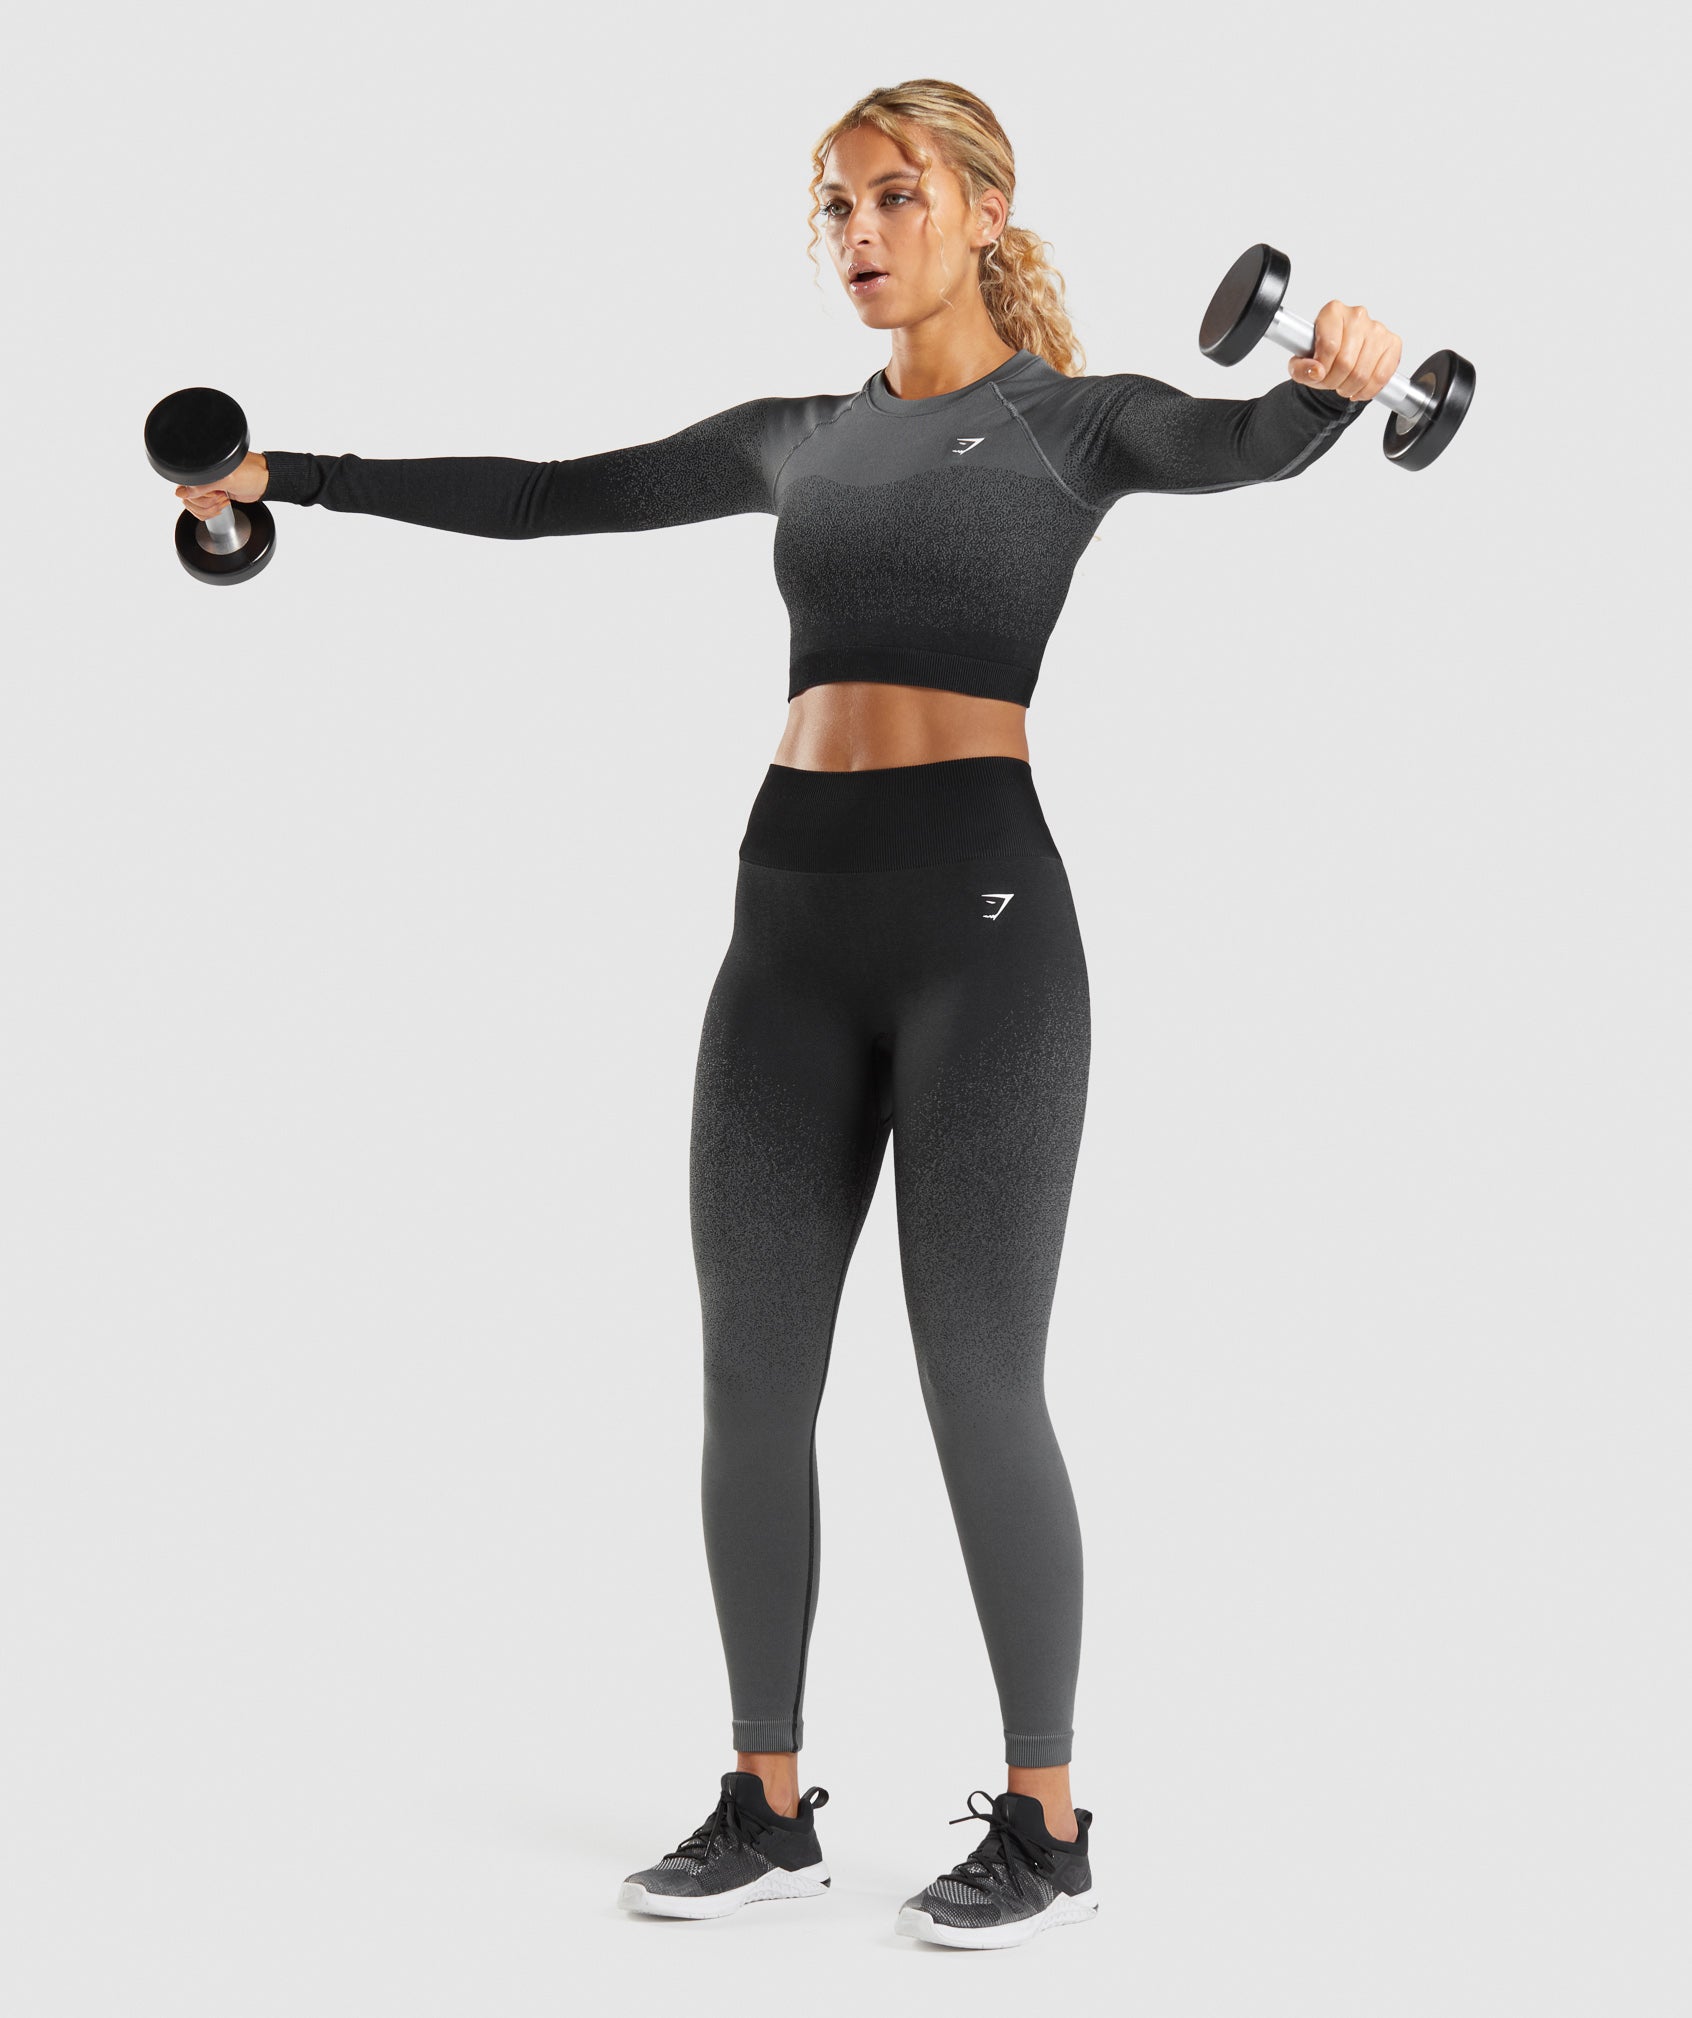 Adapt Ombre Seamless Long Sleeve Crop Top in Black/Grey - view 5